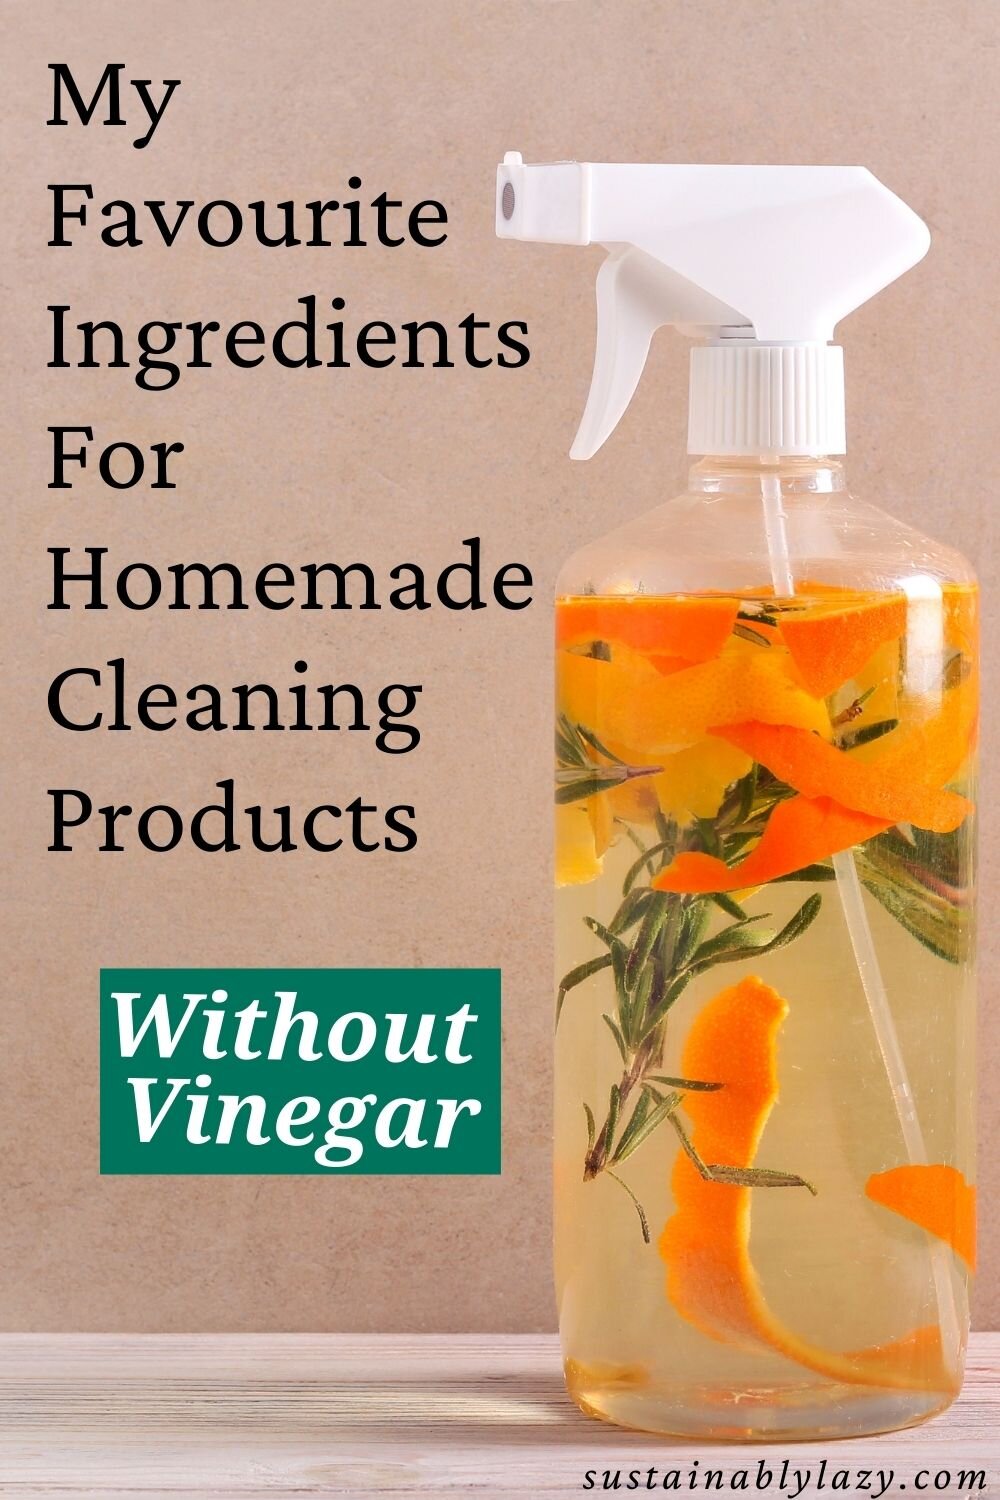 https://images.squarespace-cdn.com/content/v1/5bb8cd5aa09a7e4c80cb9fd8/1624738450803-BJAQB3TFX778IYFONO35/Natural%2C+eco-friendly+cleaning+for+beginners%3A+my+favourite+non+toxic+ingredients+for+DIY+homemade+cleaners+without+vinegar.